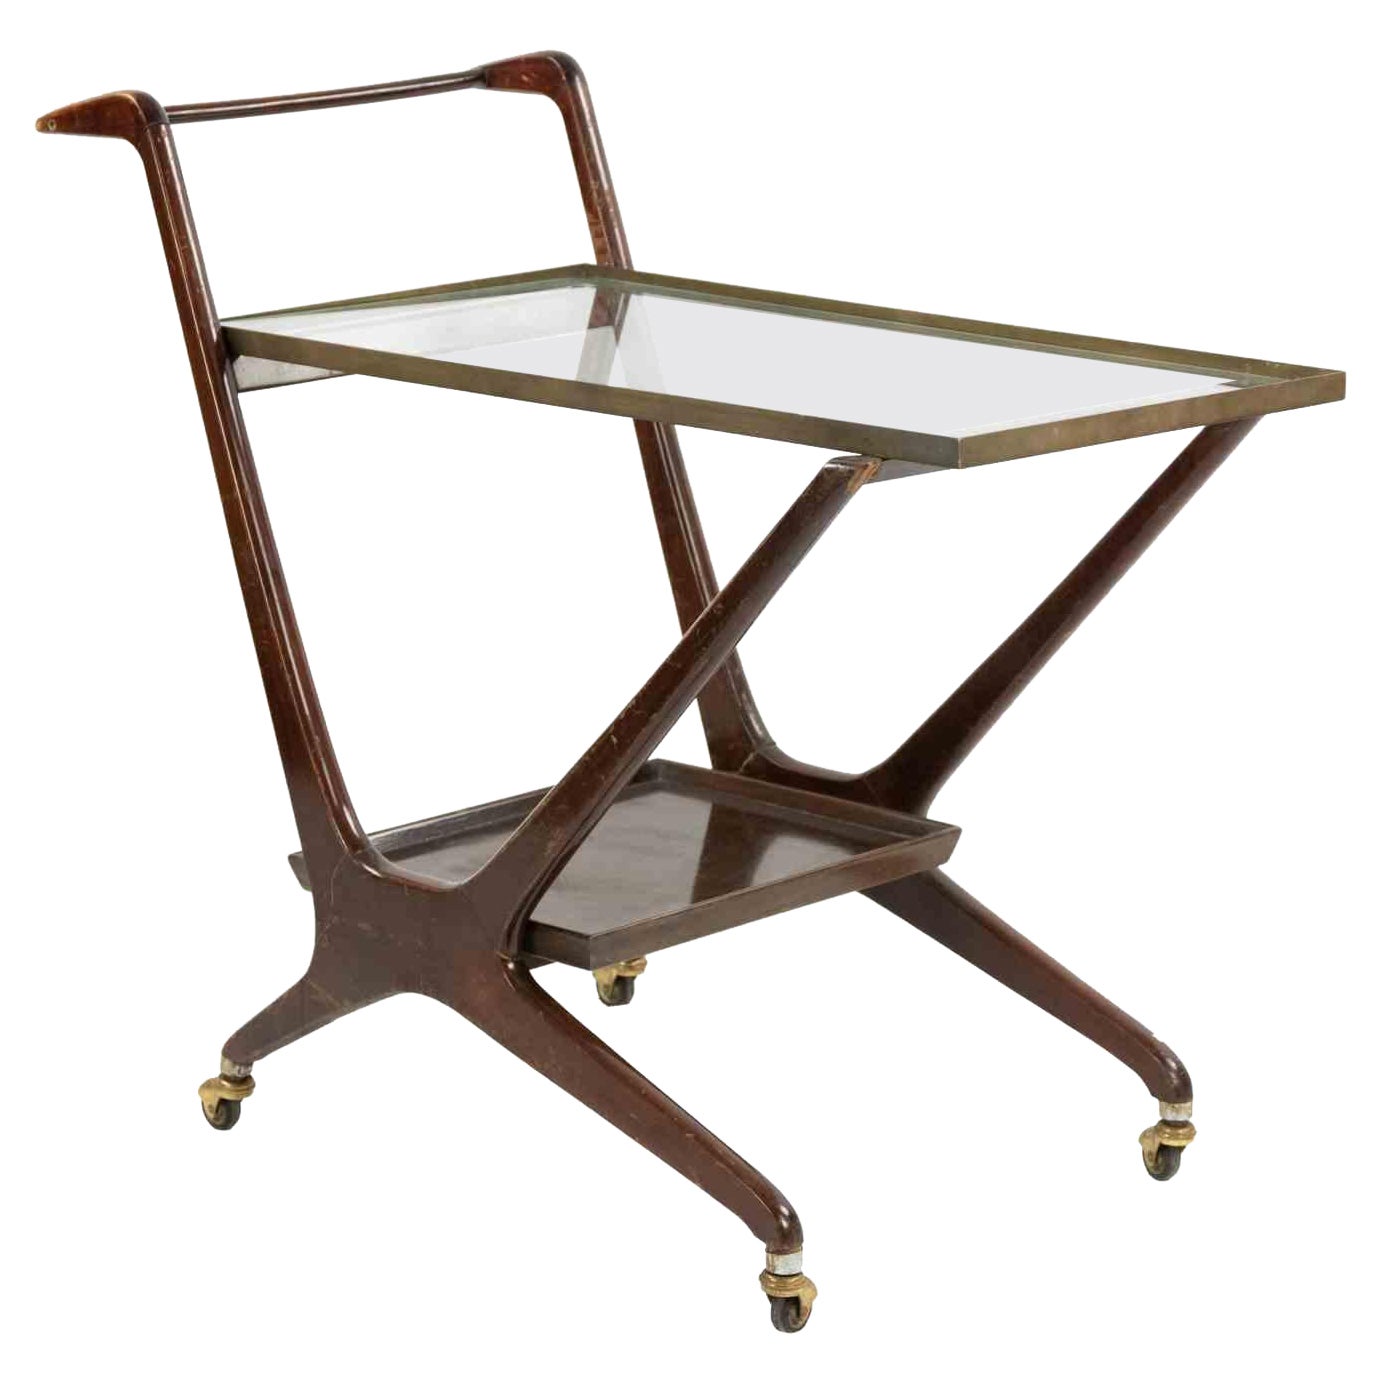 Vintage Bar Cart by Ico Parisi, Italy, 1950s